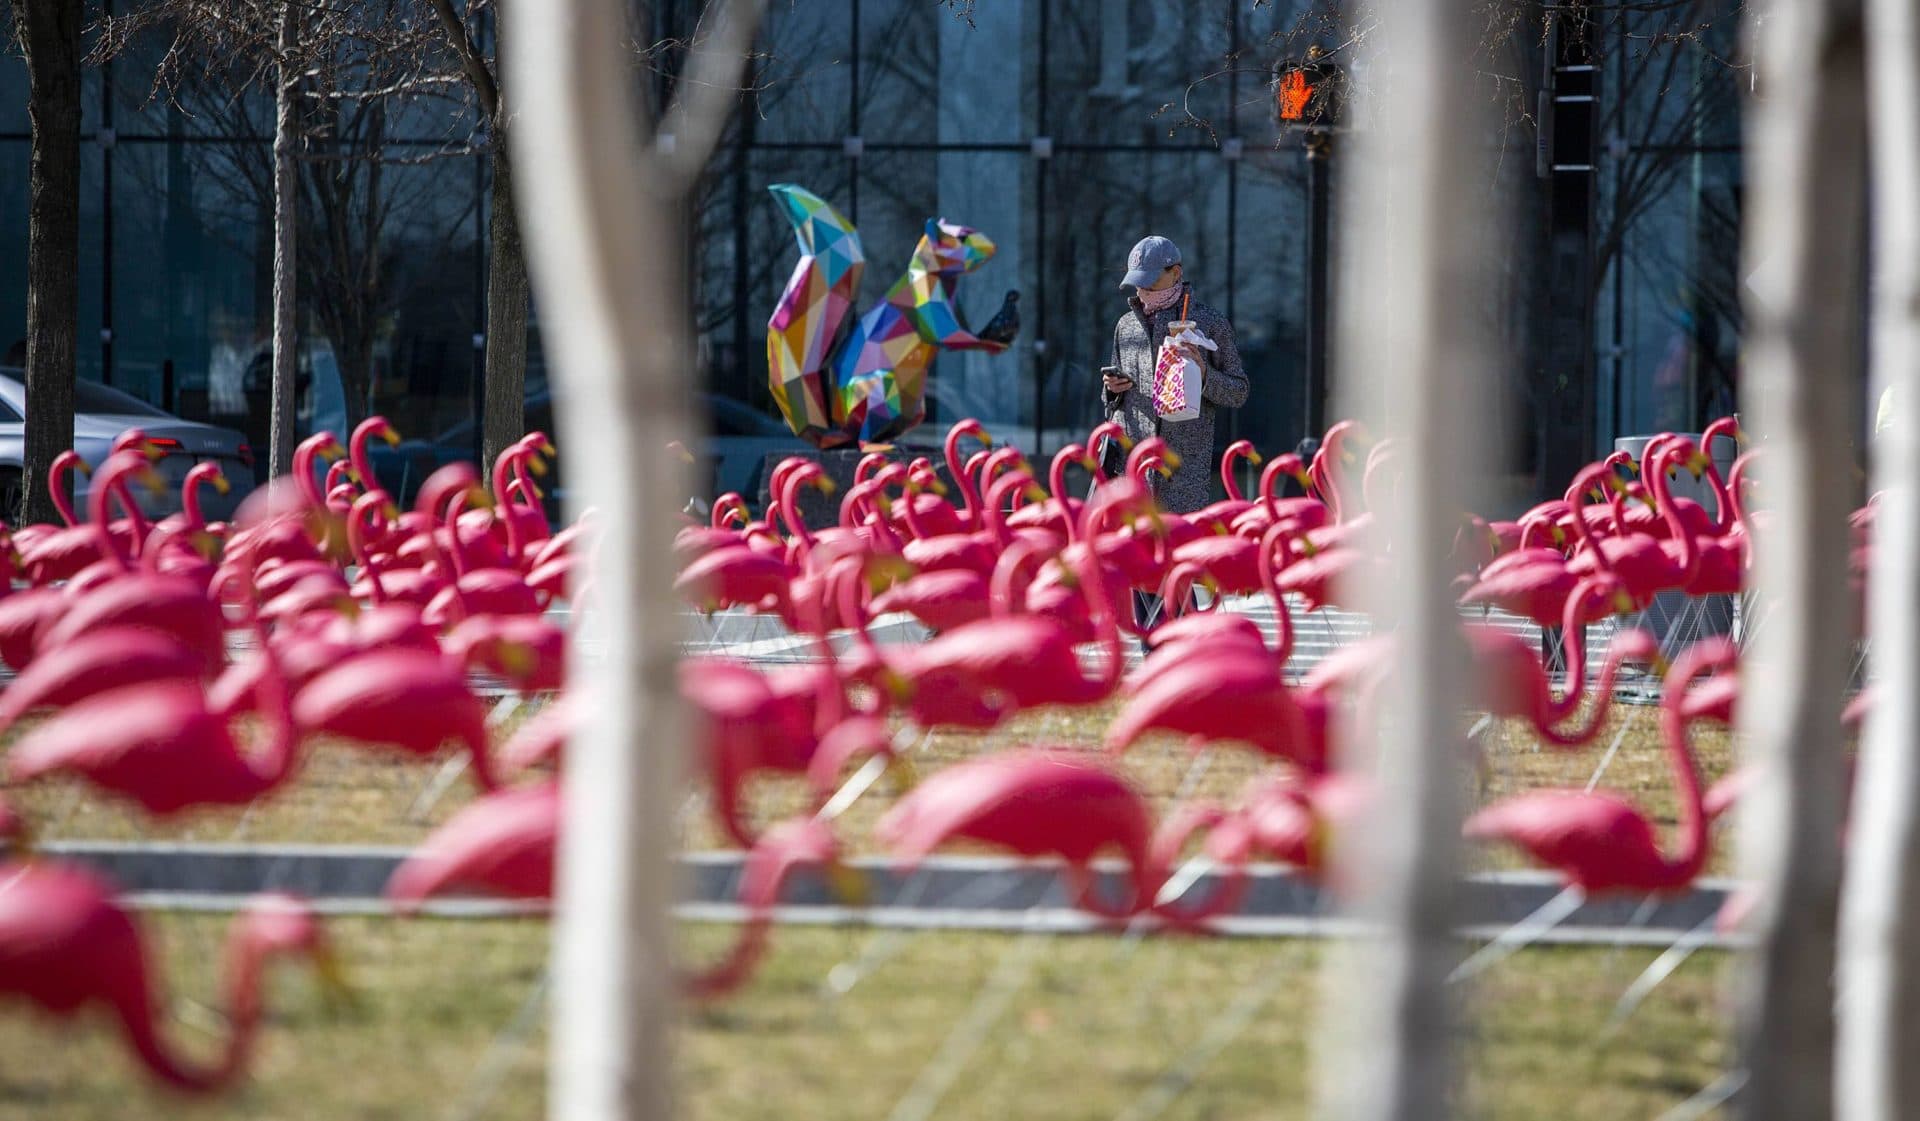 A passerby stops the take a photo of the flamingos on Boston's Seaport Common. (Robin Lubbock/WBUR)